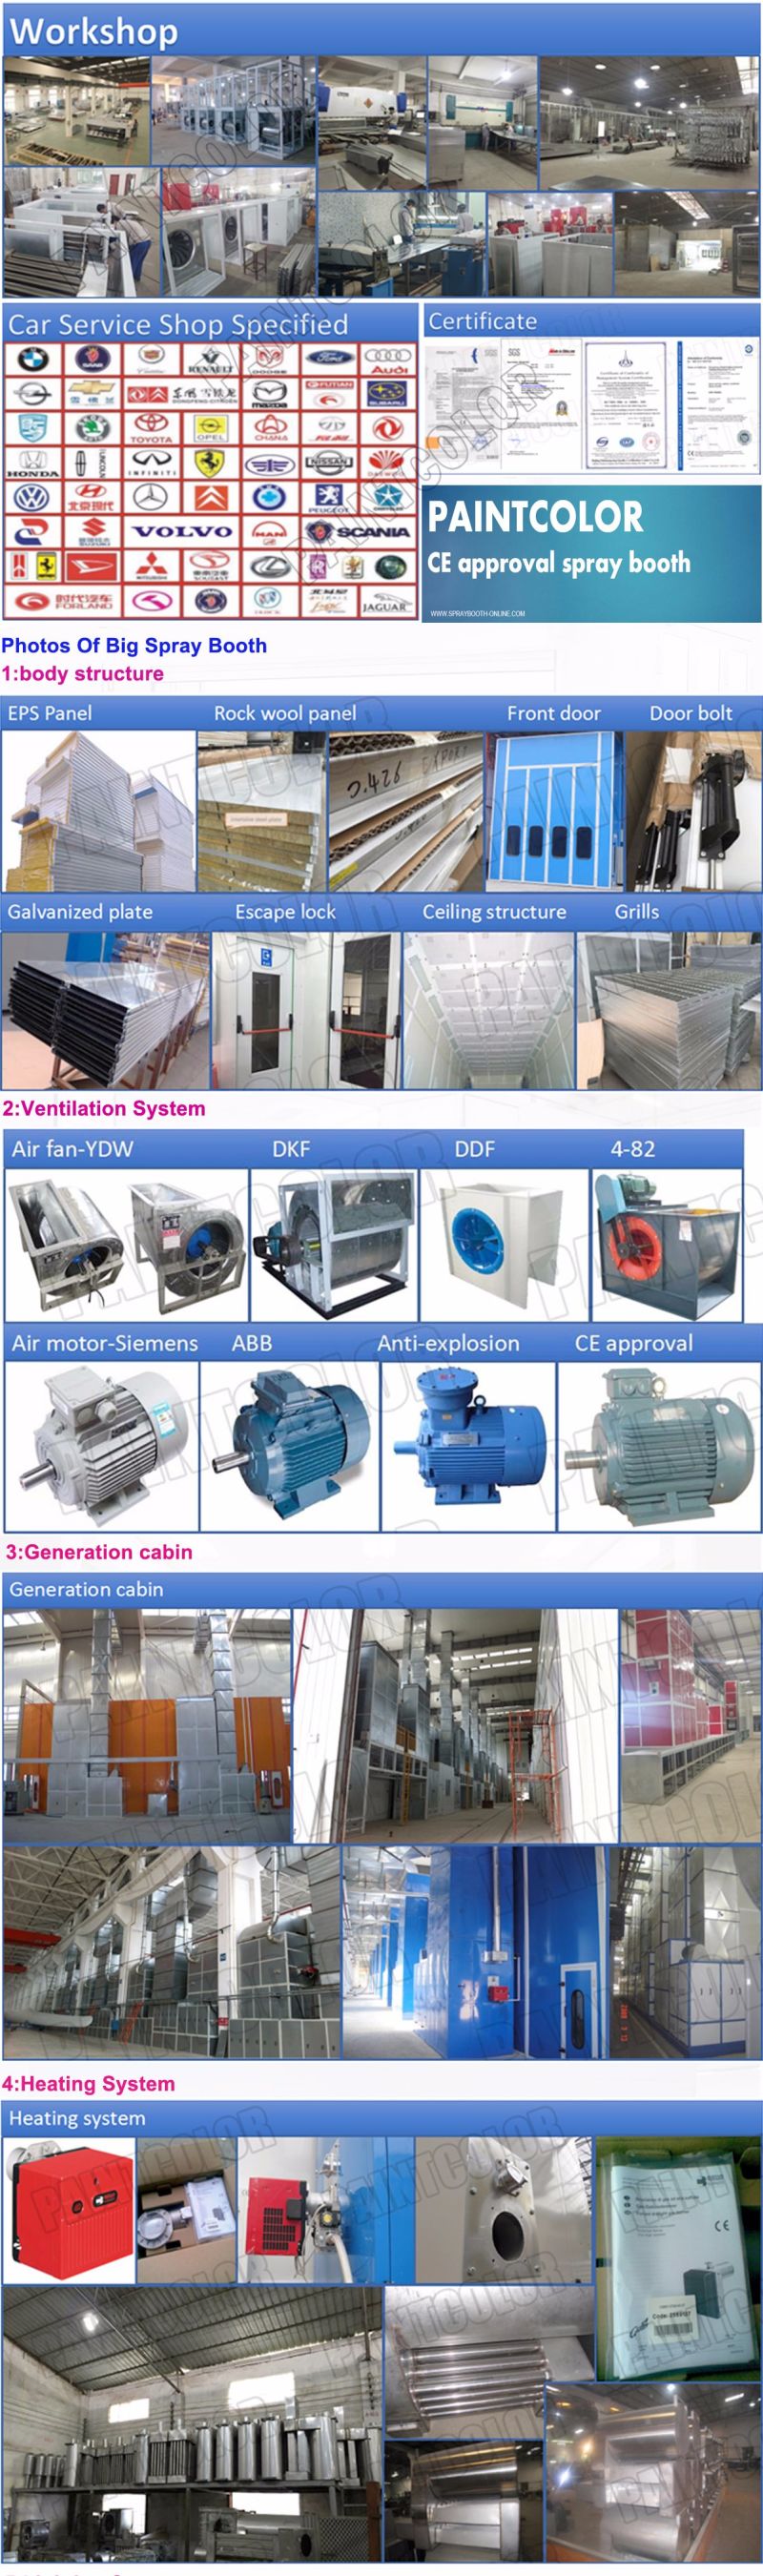 Paint Spray Equipment Machine for Big Items with Air Makeup Units on Back Side Back Side Draft Paint Oven